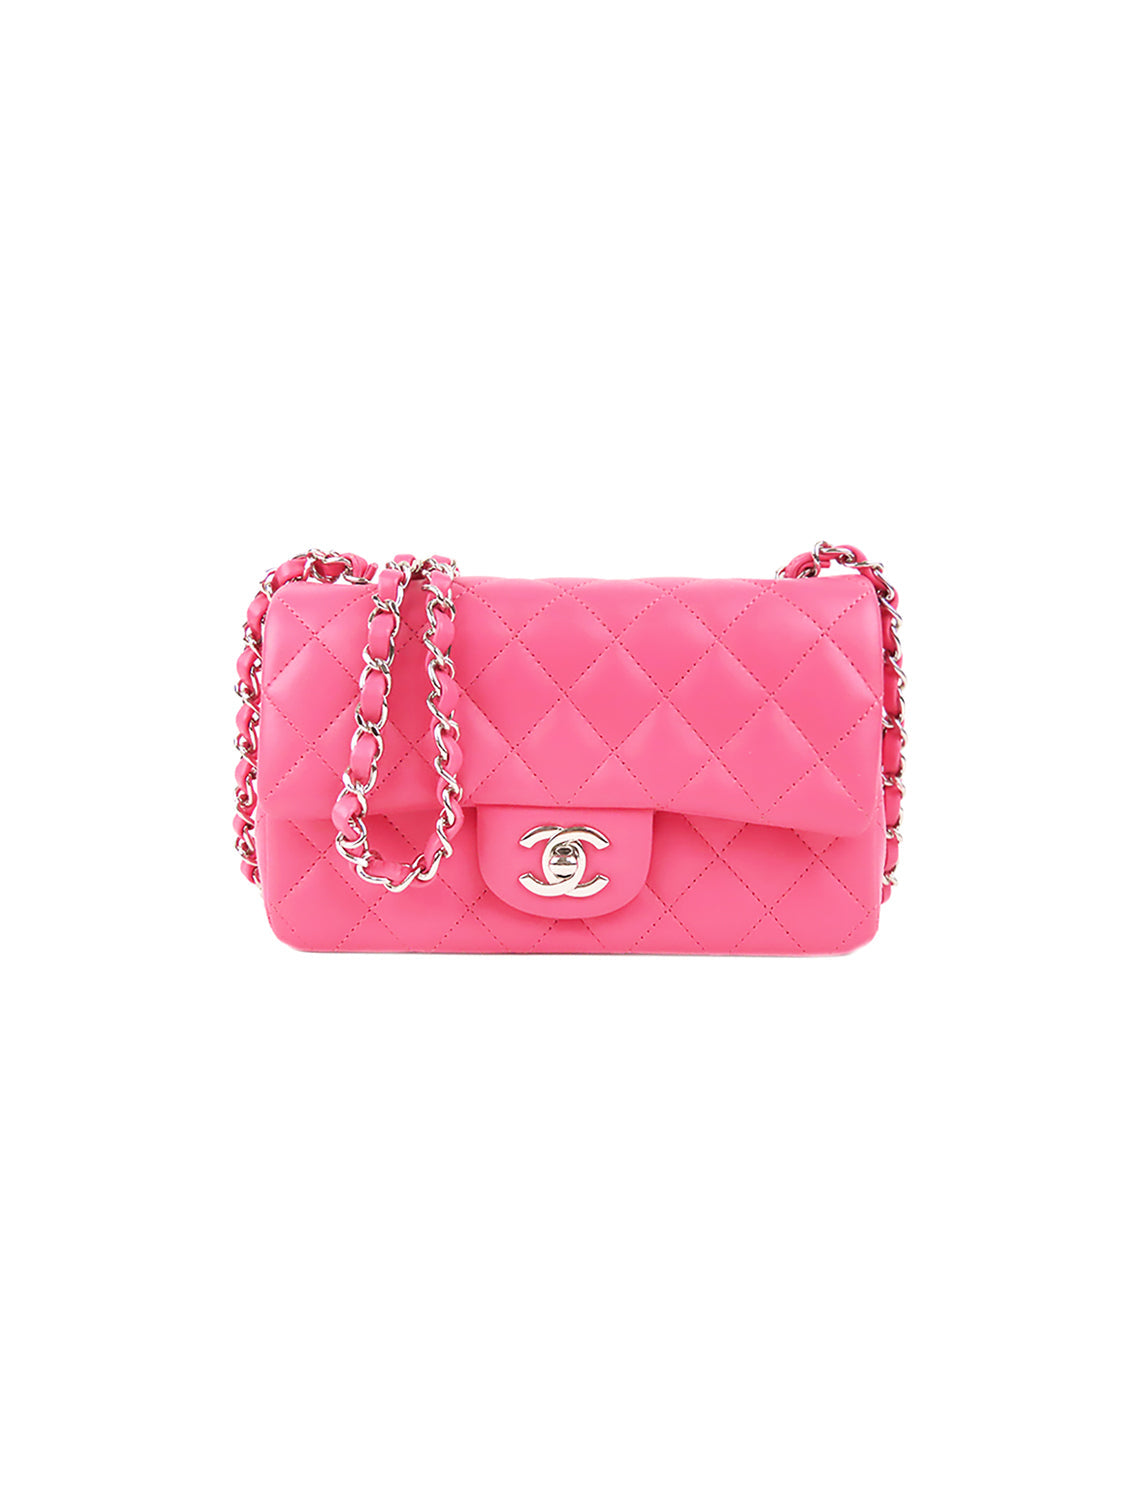 Chanel 2005-2006 Limited Edition Pink and Black Flap · INTO